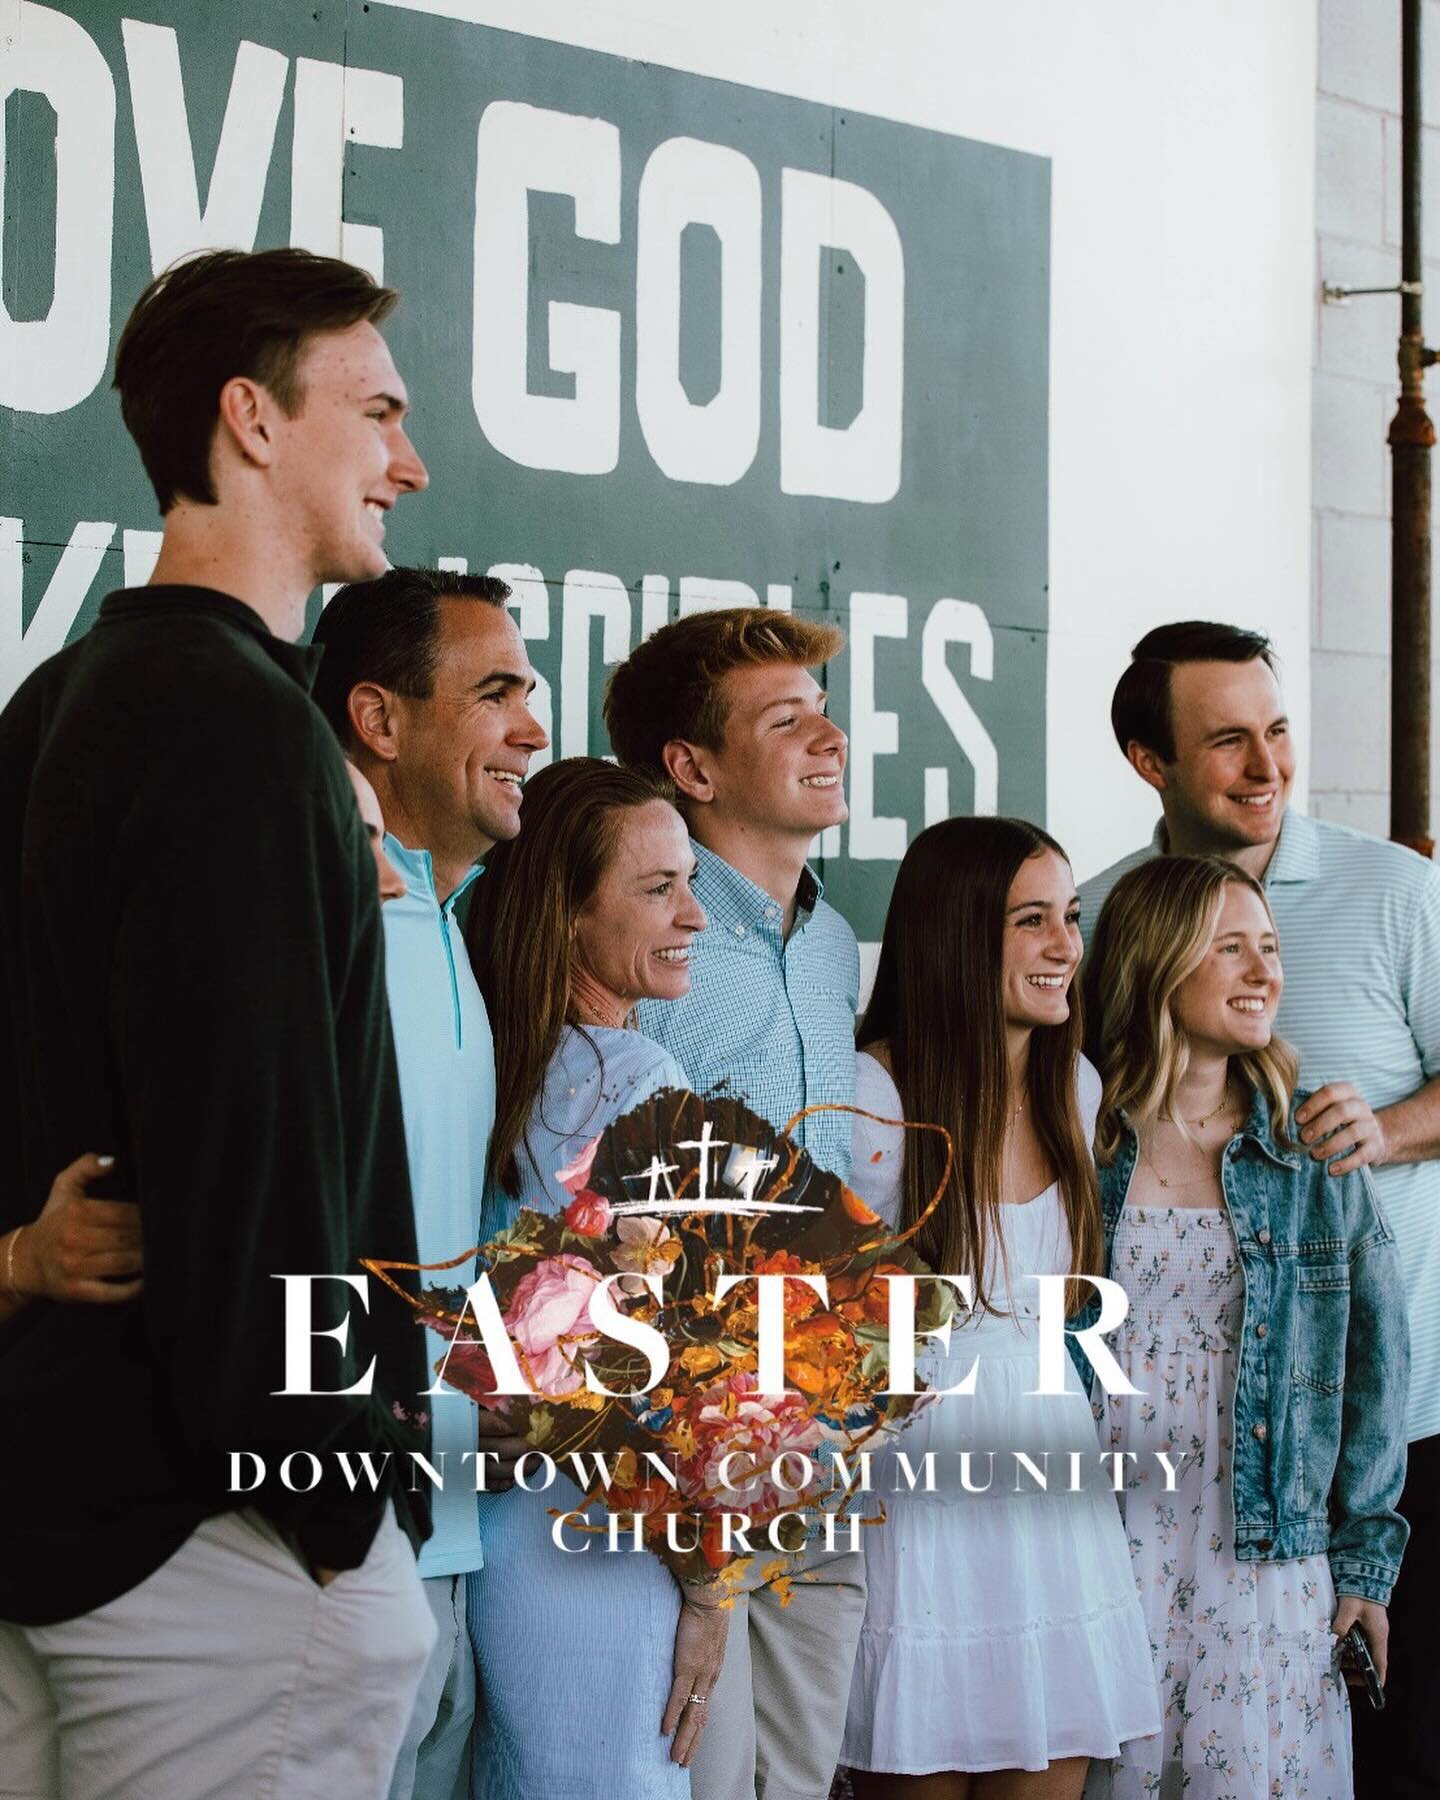 IT IS THE GREATEST DAY IN HISTORY and it is such a JOY to gather together to celebrate it! 🤍 HAPPY HAPPY EASTER!

Let&rsquo;s celebrate THE RISEN KING today and everyday!